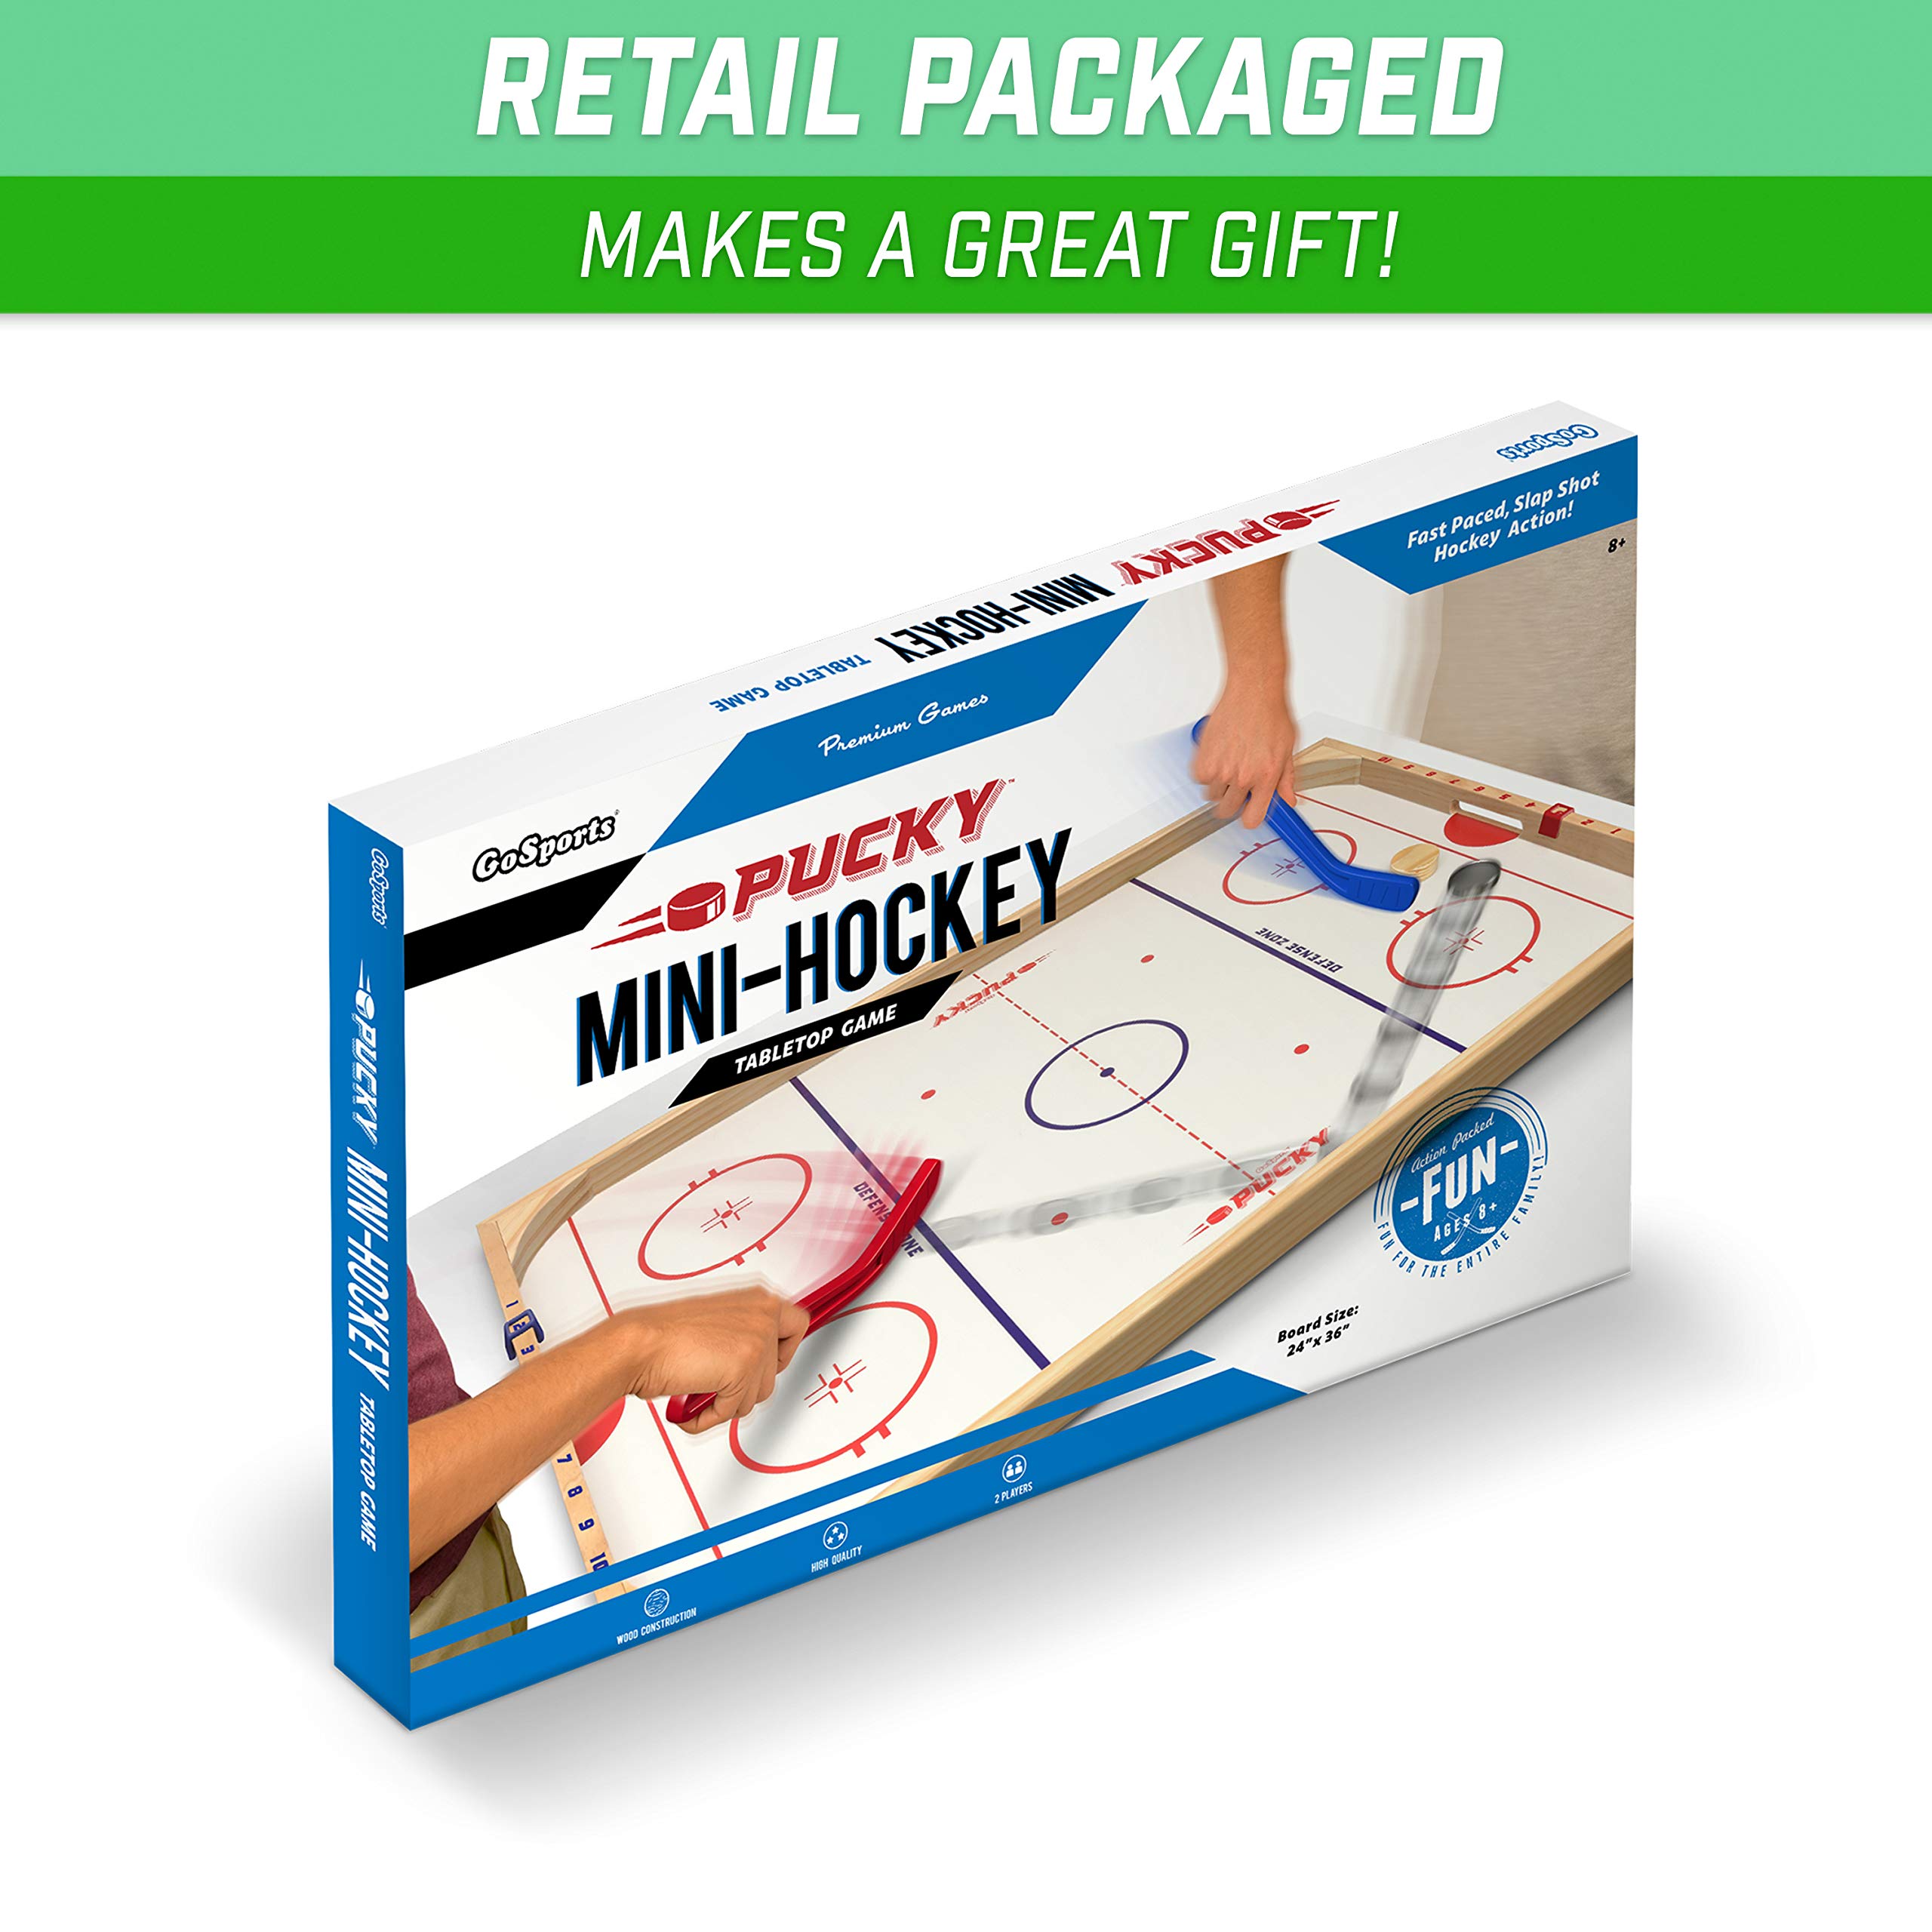 GoSports Ice Pucky Wooden Tabletop Hockey Game for Kids & Adults - Includes 1 game board, 2 Hockey Sticks & 3 Pucks